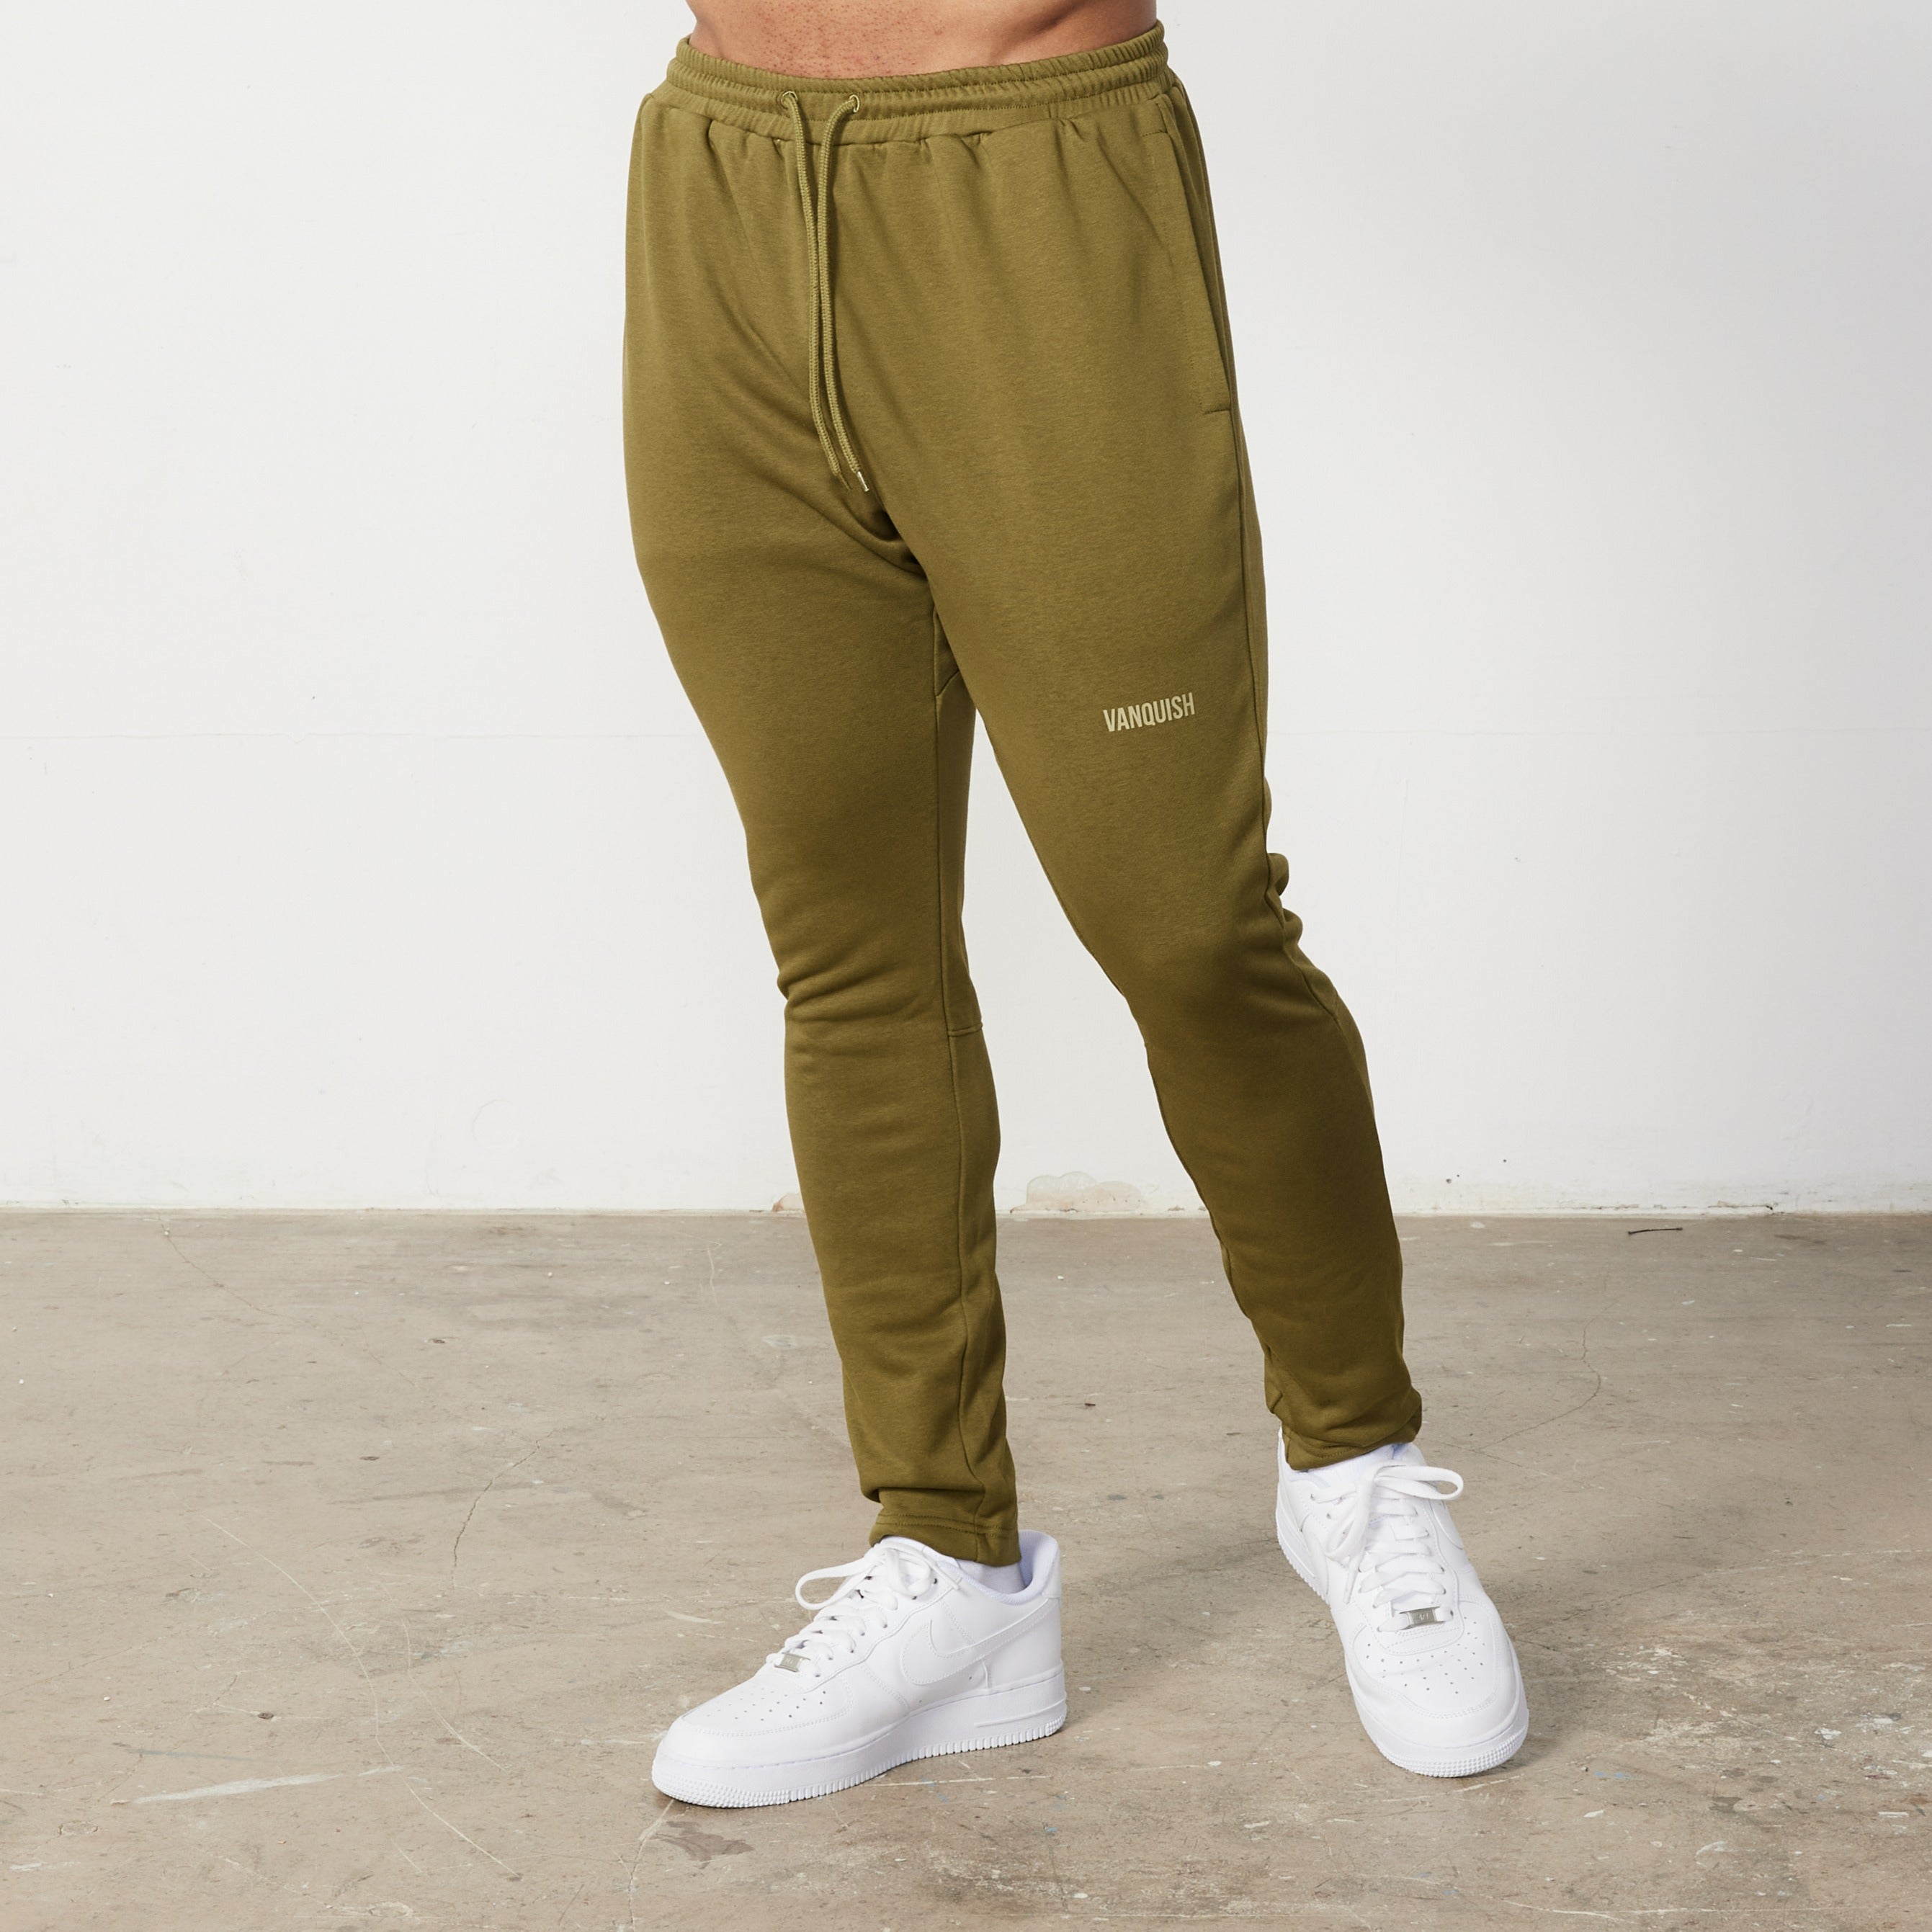 Vanquish Essential Olive Green Tapered Fit Sweatpants